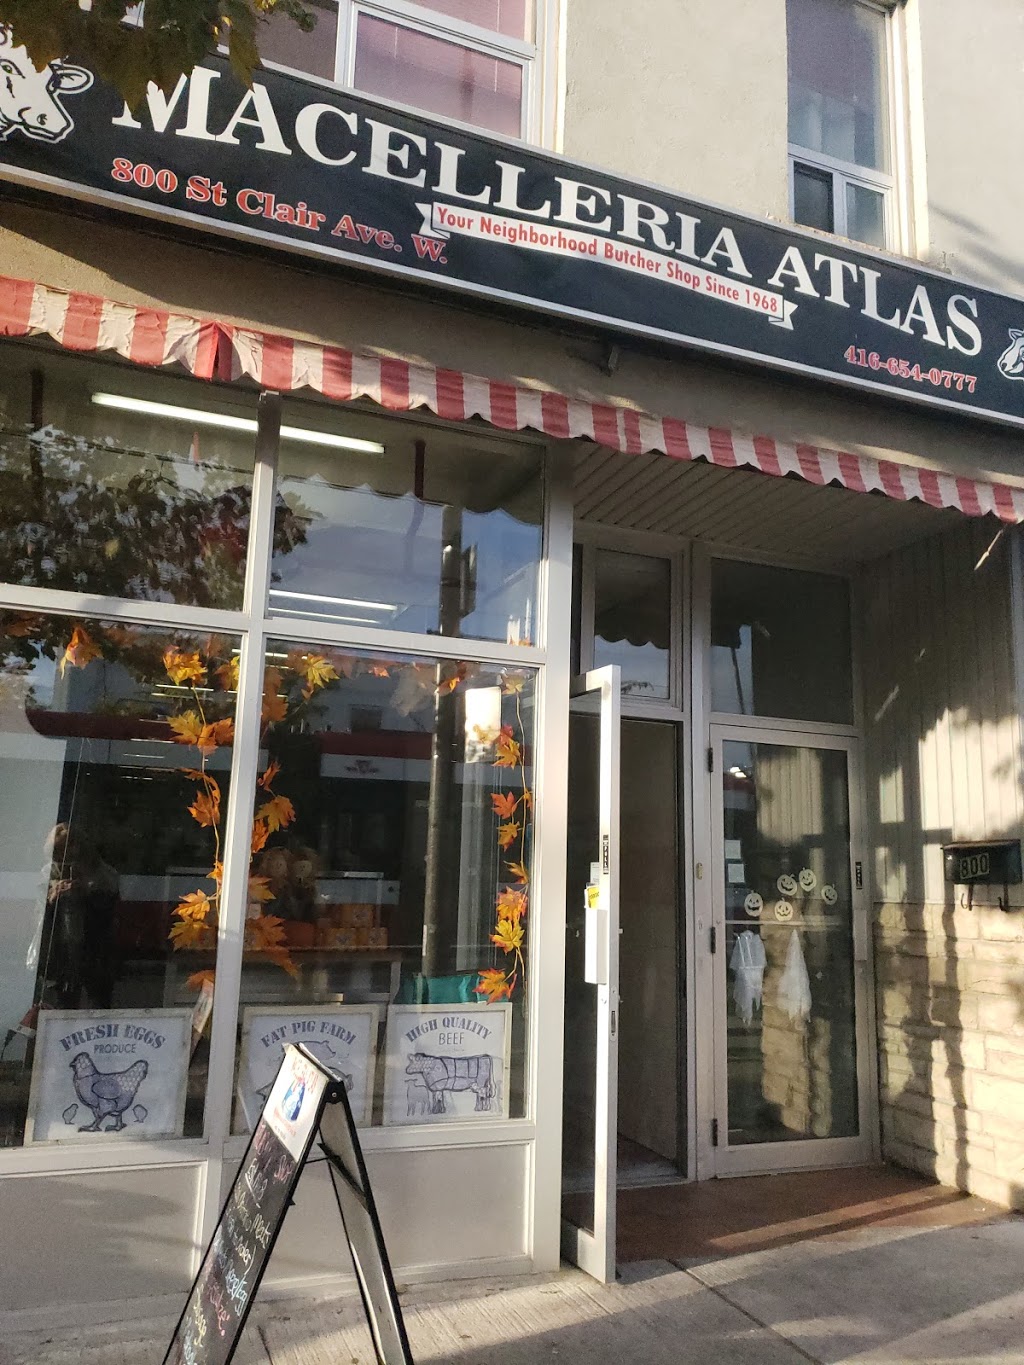 Macelleria Atlas | store | 800 St Clair Ave W, Toronto, ON M6C 1B6, Canada | 4166540777 OR +1 416-654-0777